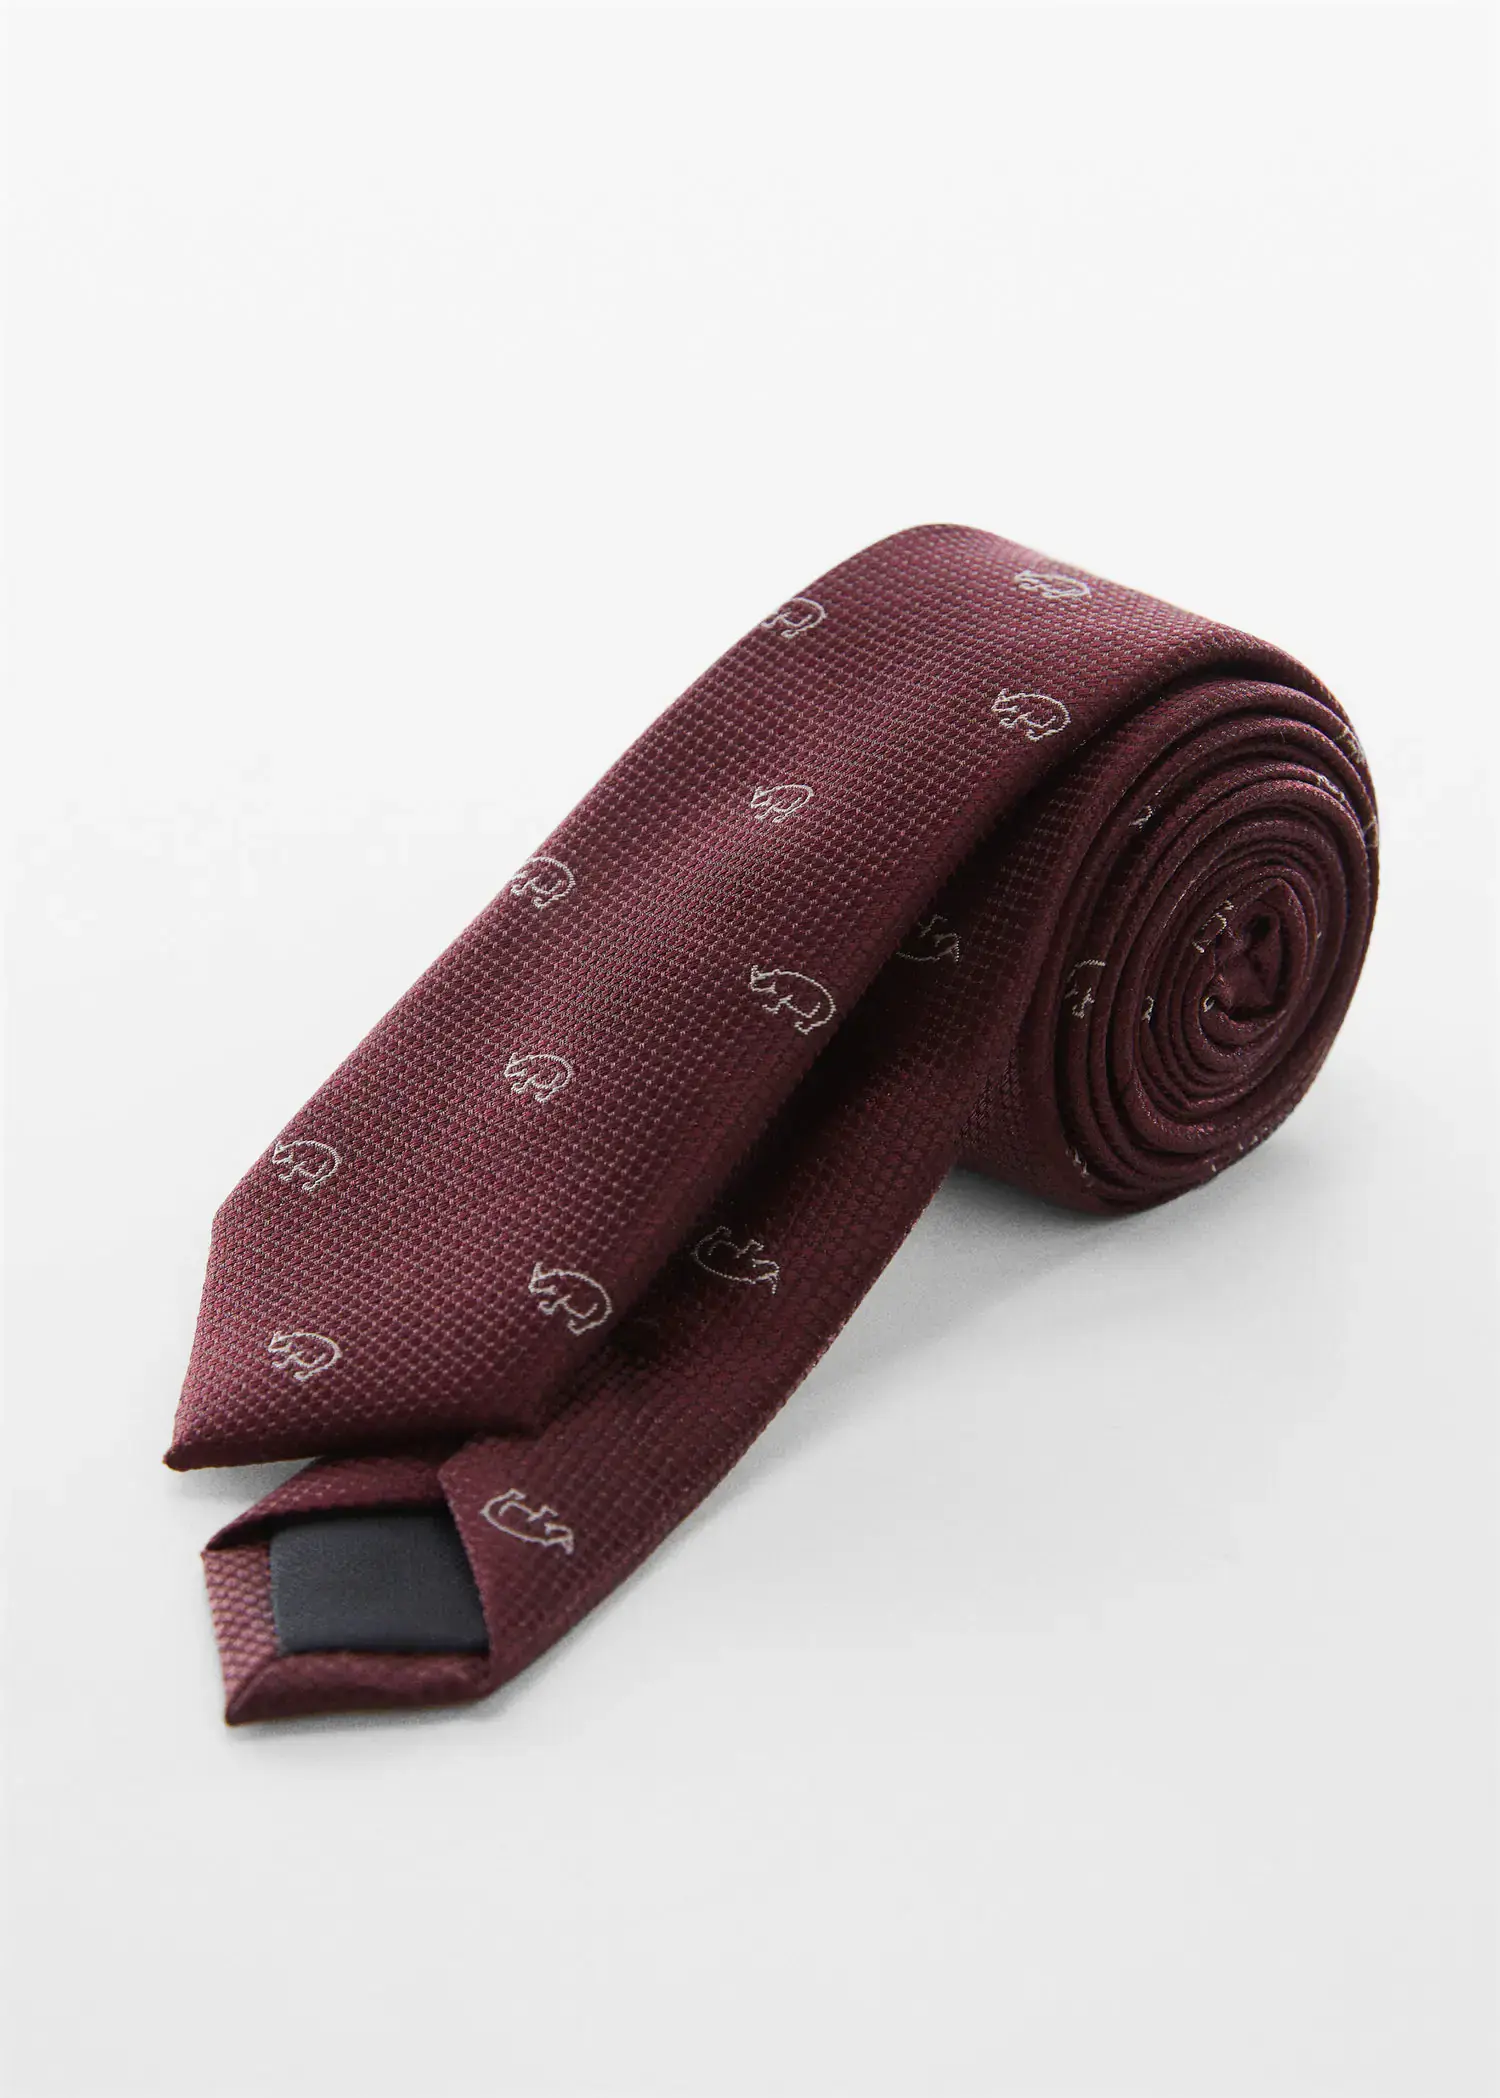 Mango Tie with animals print . a red tie is laying on a table. 